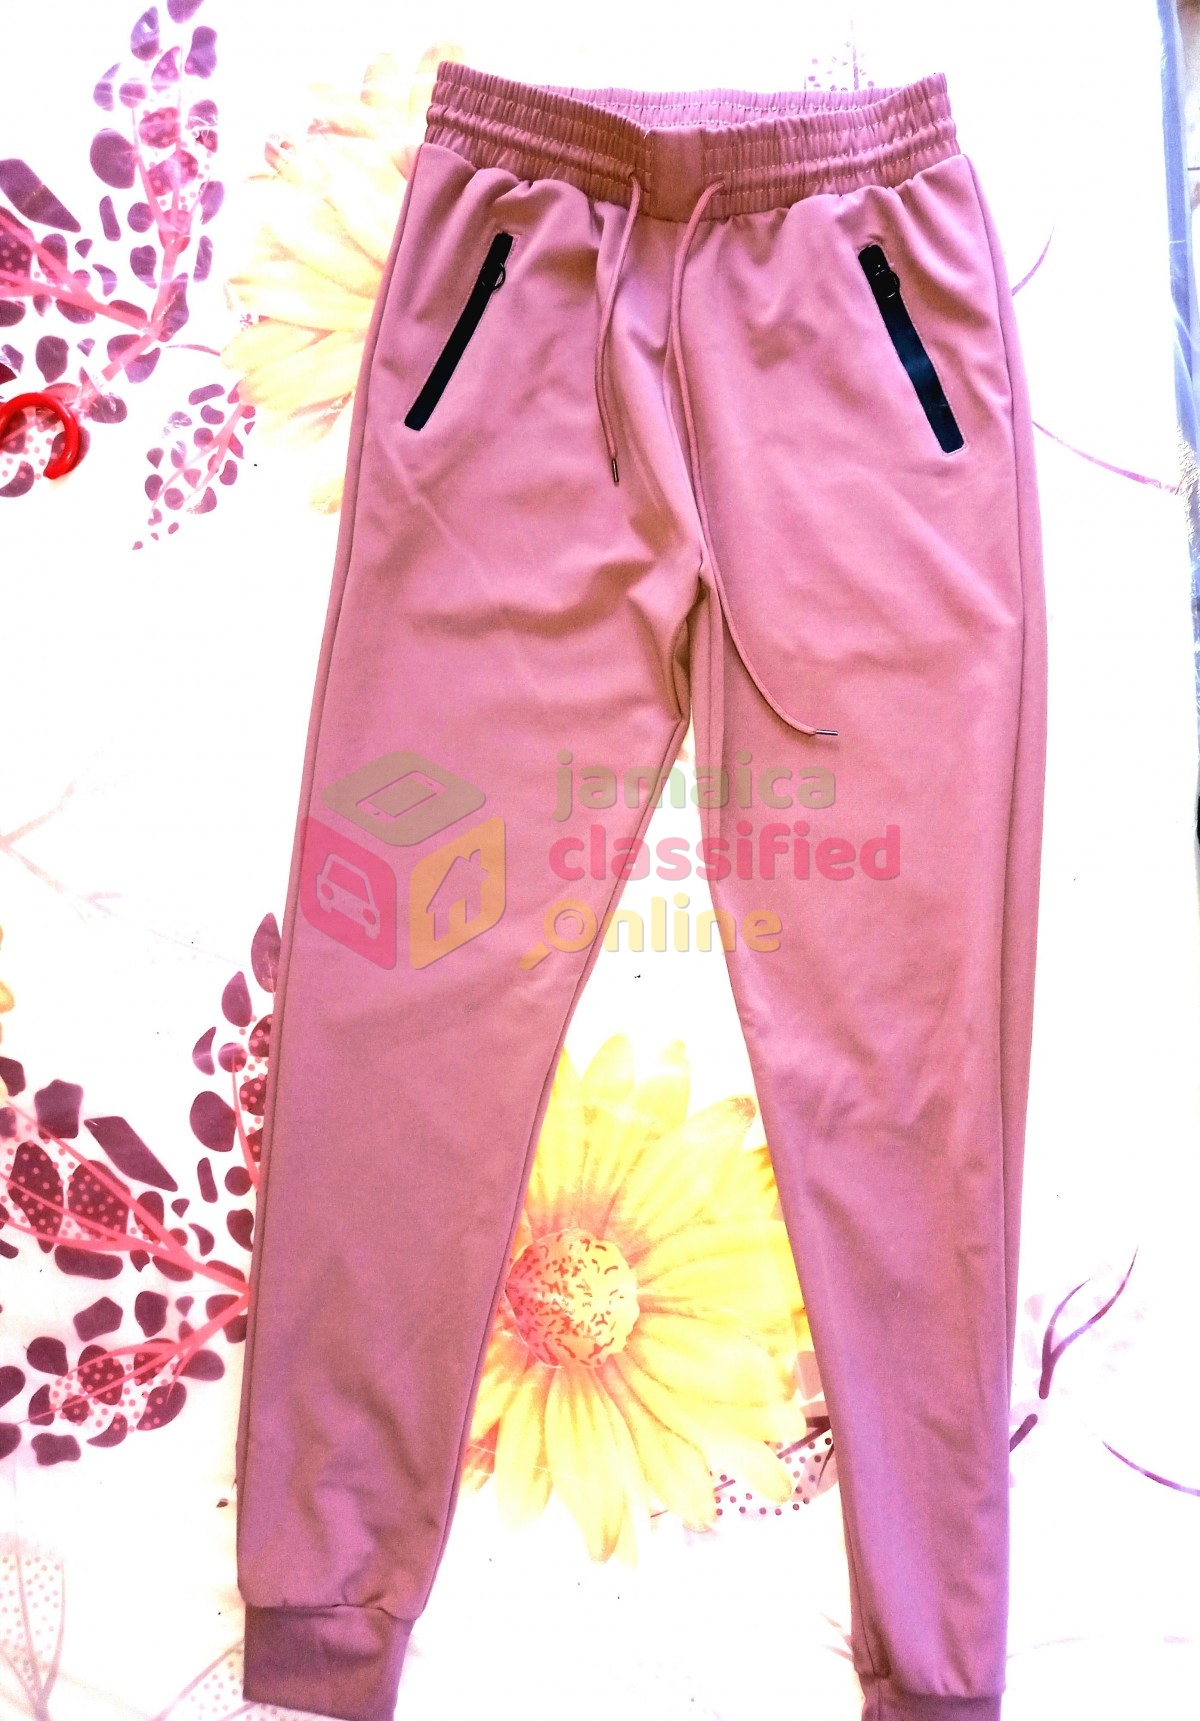 Pink Silk Pants With Black Zippers for sale in Montego Bay St James ...